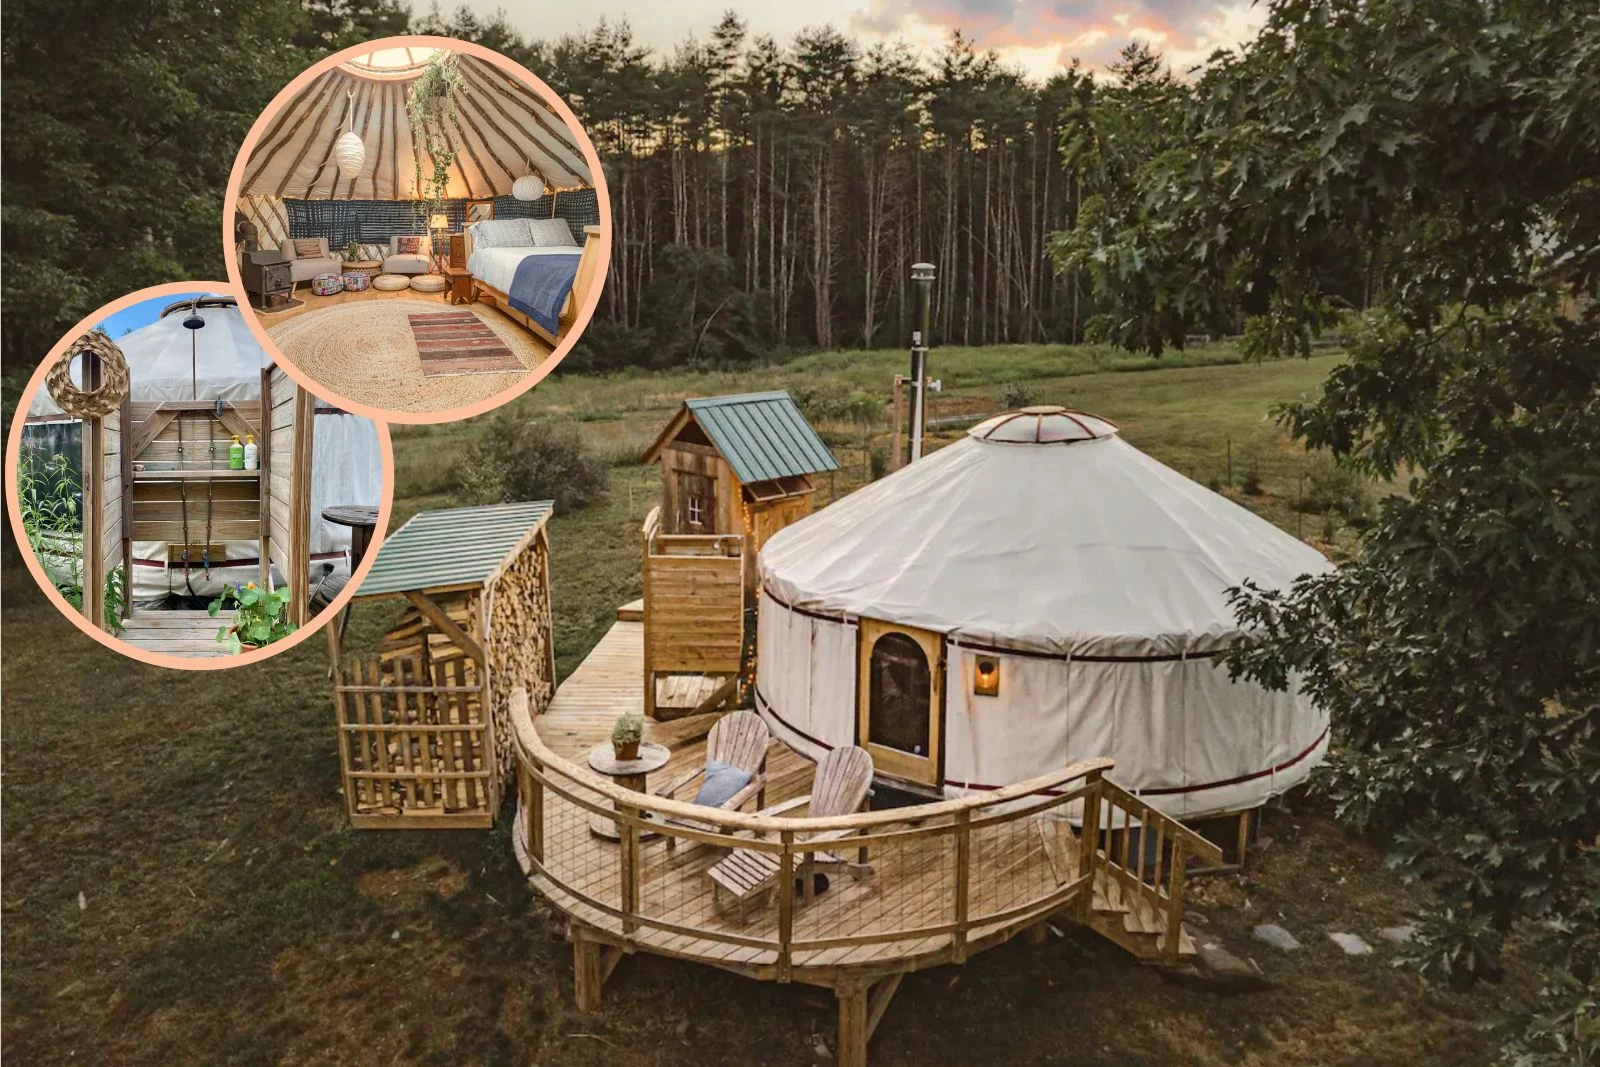 This Private Vermont Retreat Yurt is an Idyllic Year-Round Escape